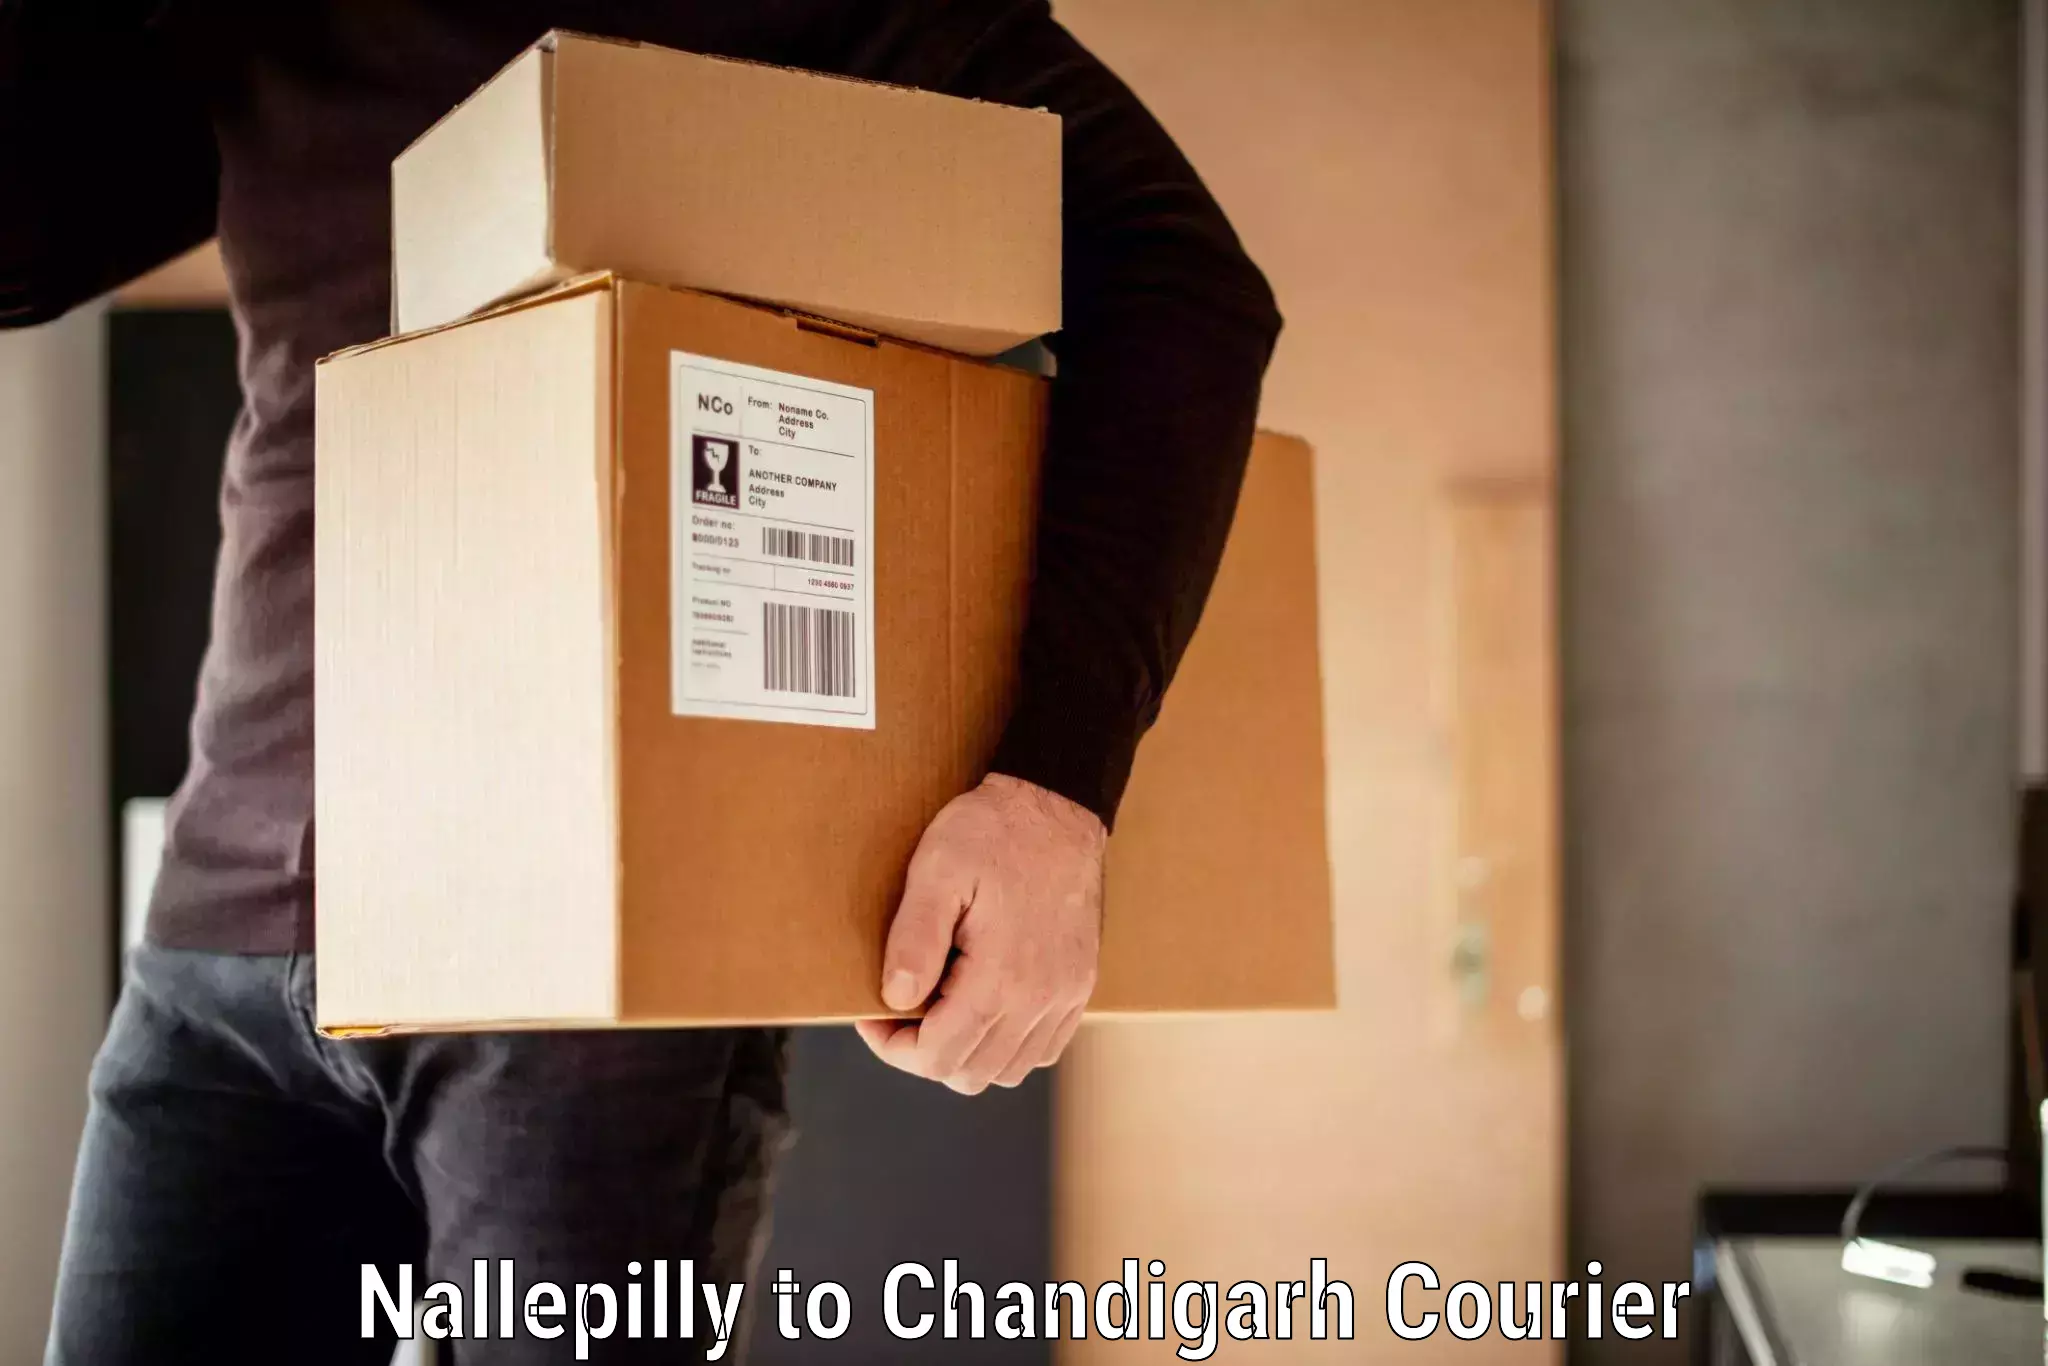 Same day luggage service Nallepilly to Chandigarh